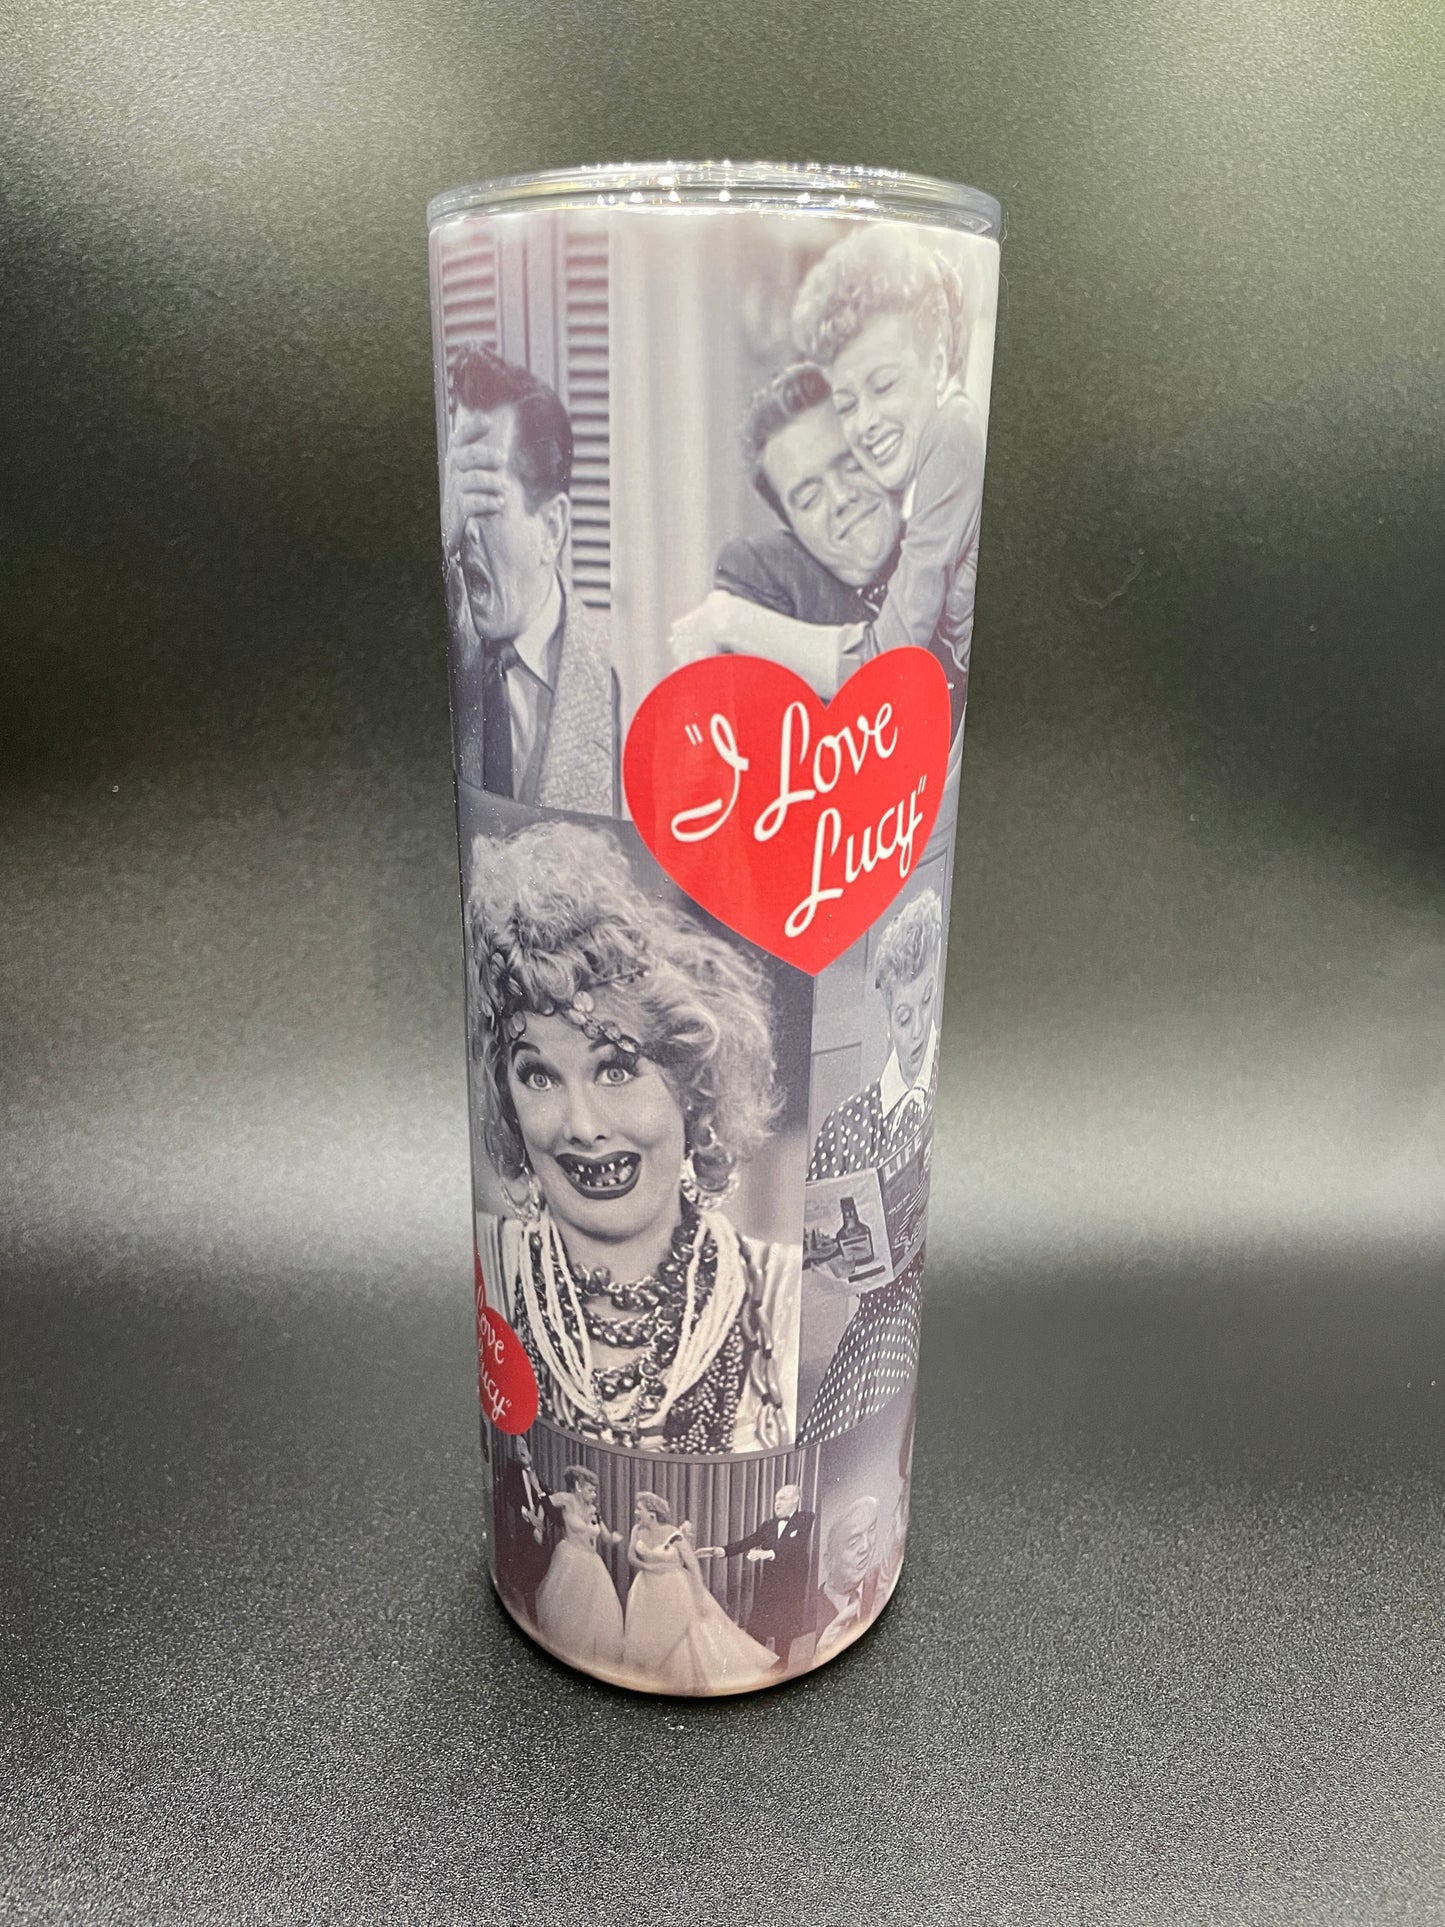 Lucy tumbler - I love lucy, tv show, tv show tumbler, classic tv tumbler, tumbler, 20 oz tumbler, Xmas gift, gift for mom